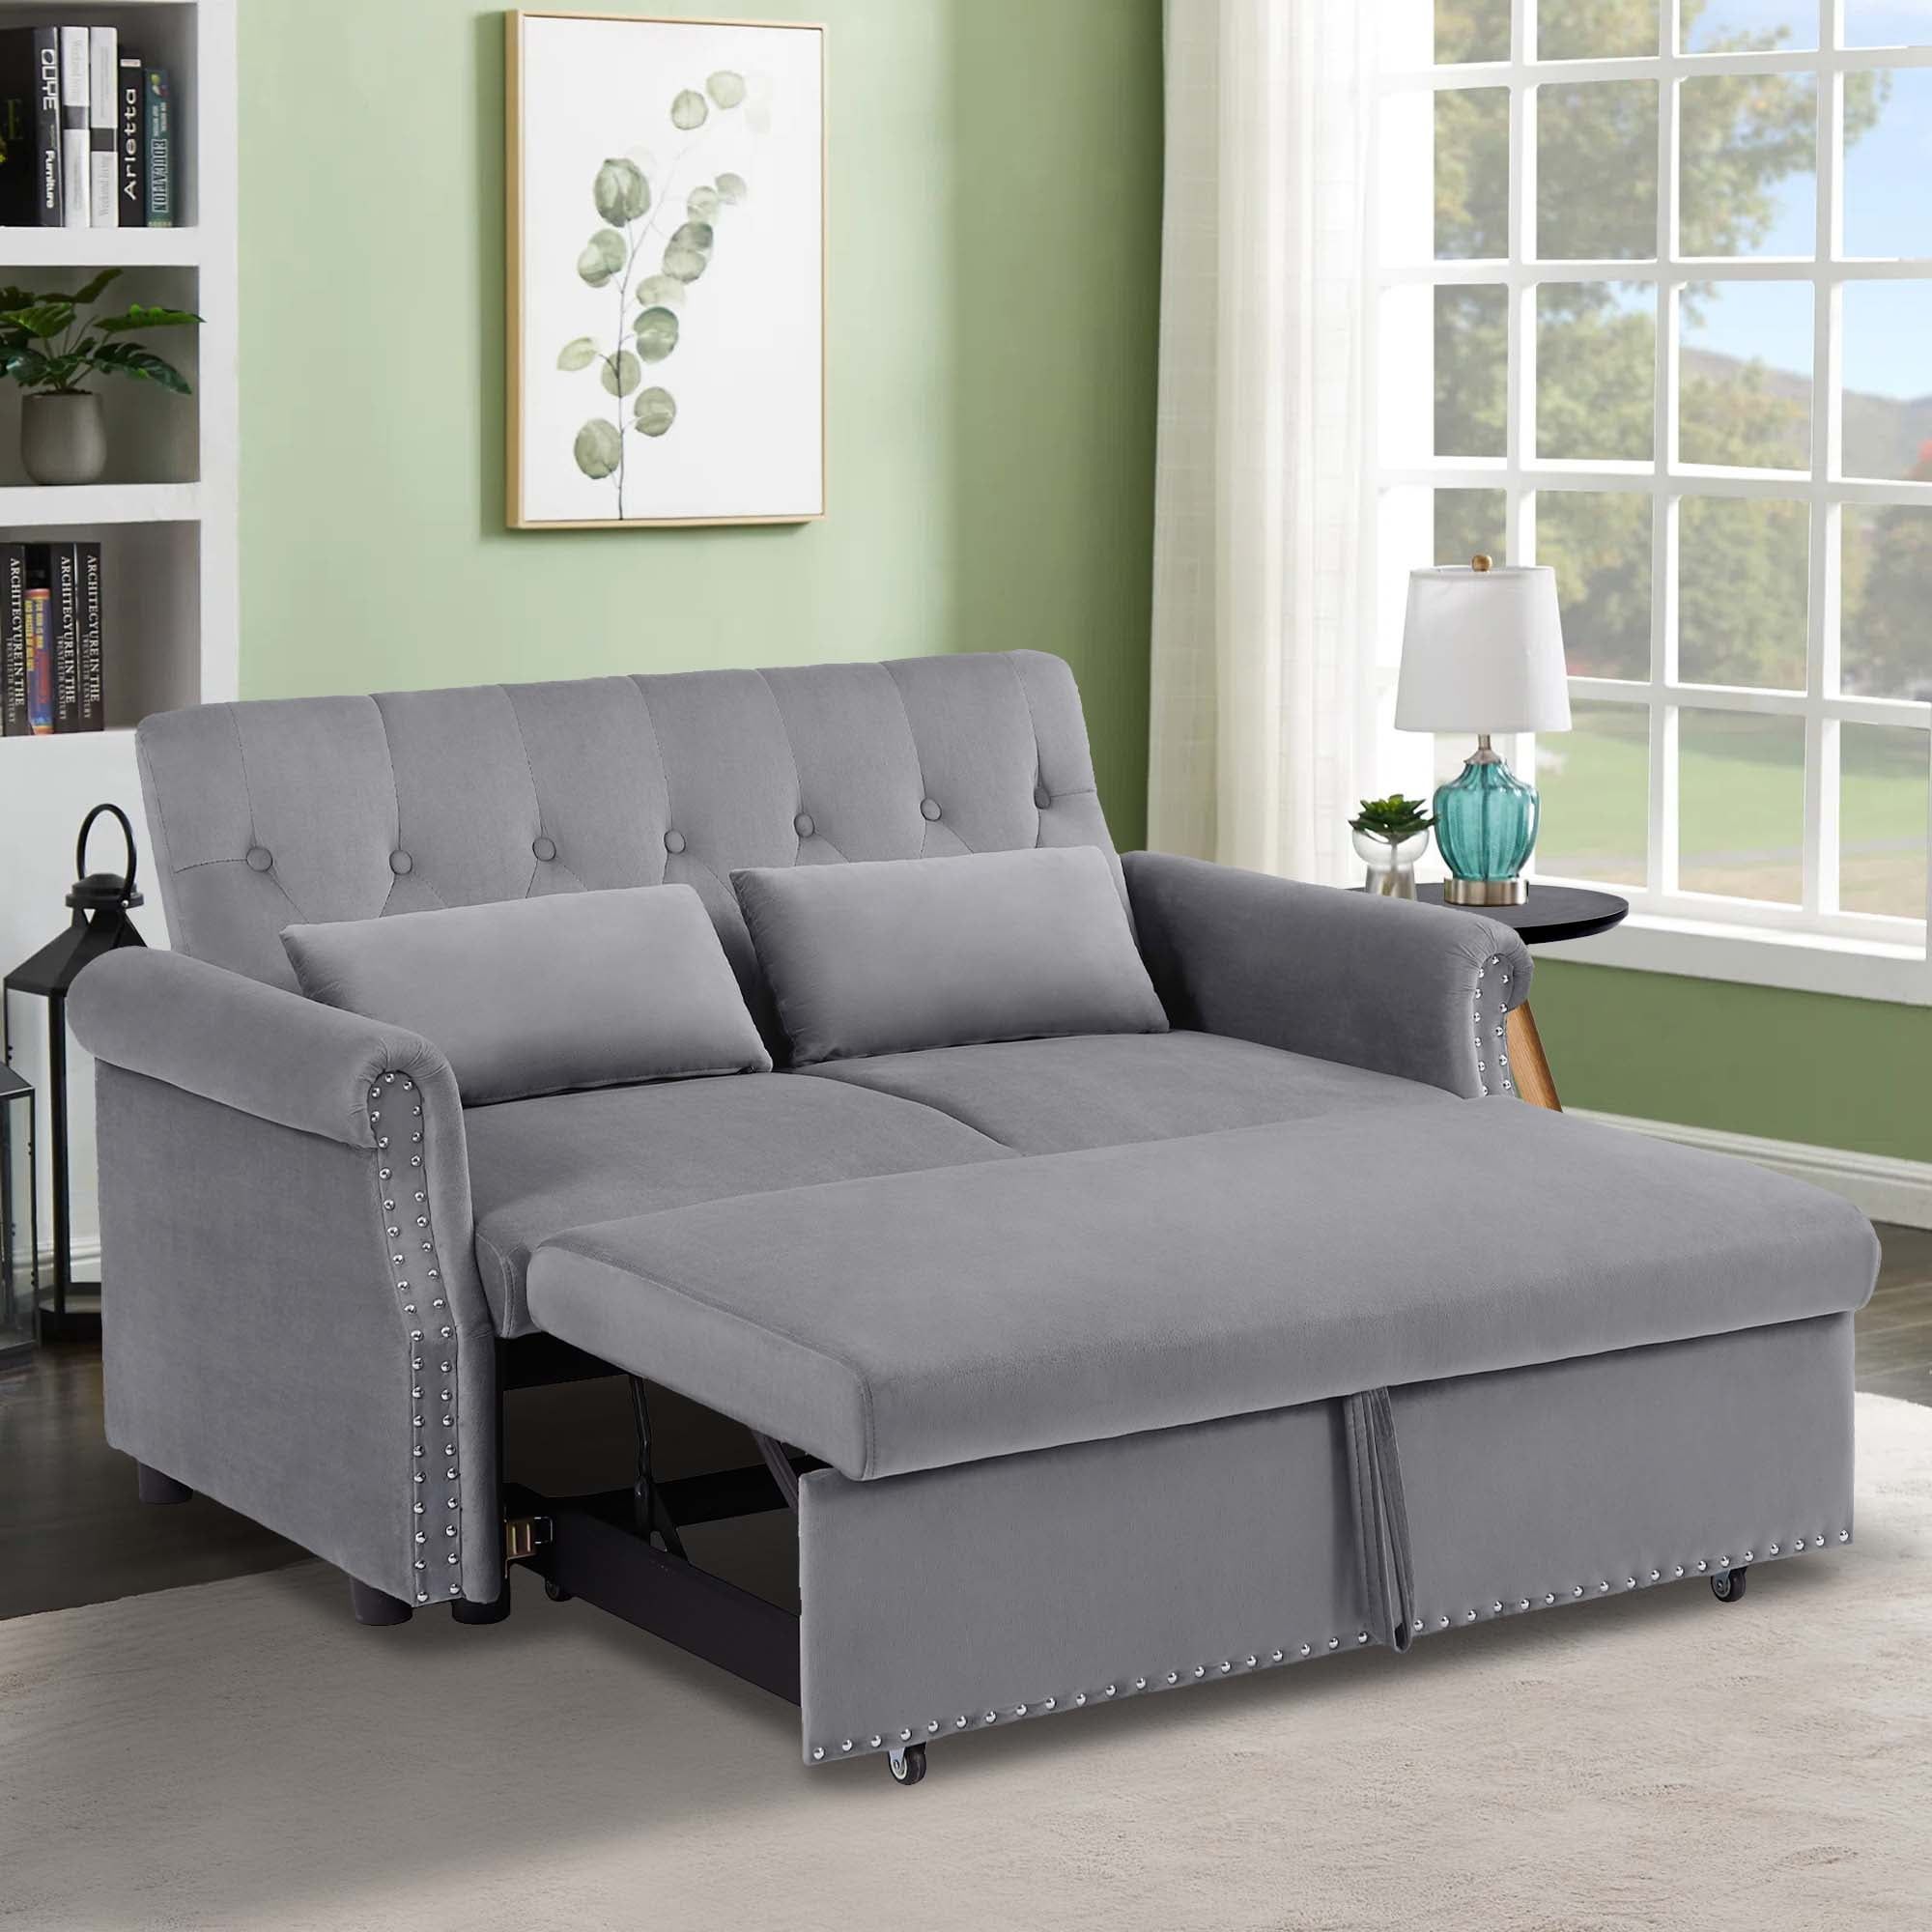 Aukfa 55" Convertible Sleeper Sofa Bed With Pull Out Couch, Velvet Tufted  Button Backrest Loveseat – Gray – Walmart Intended For Tufted Convertible Sleeper Sofas (View 7 of 15)